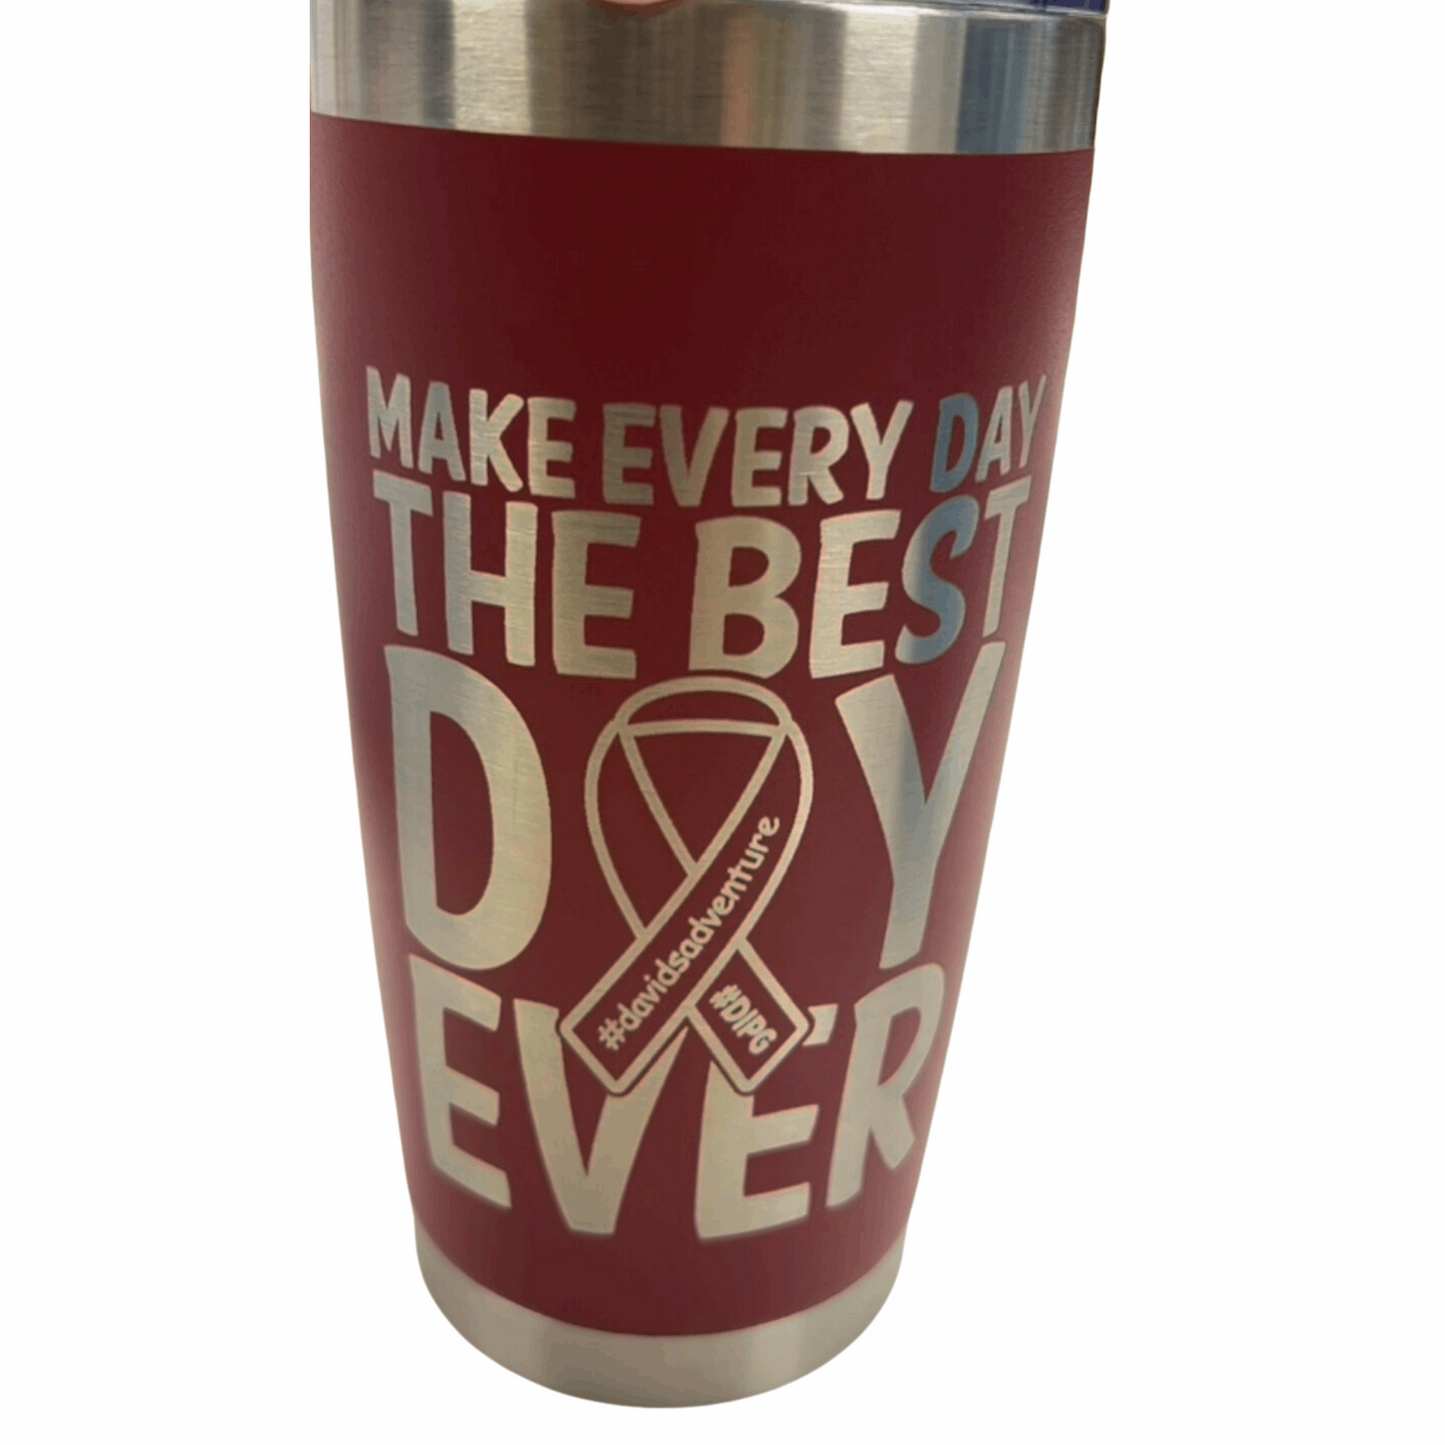 The Best Day Ever Tumbler